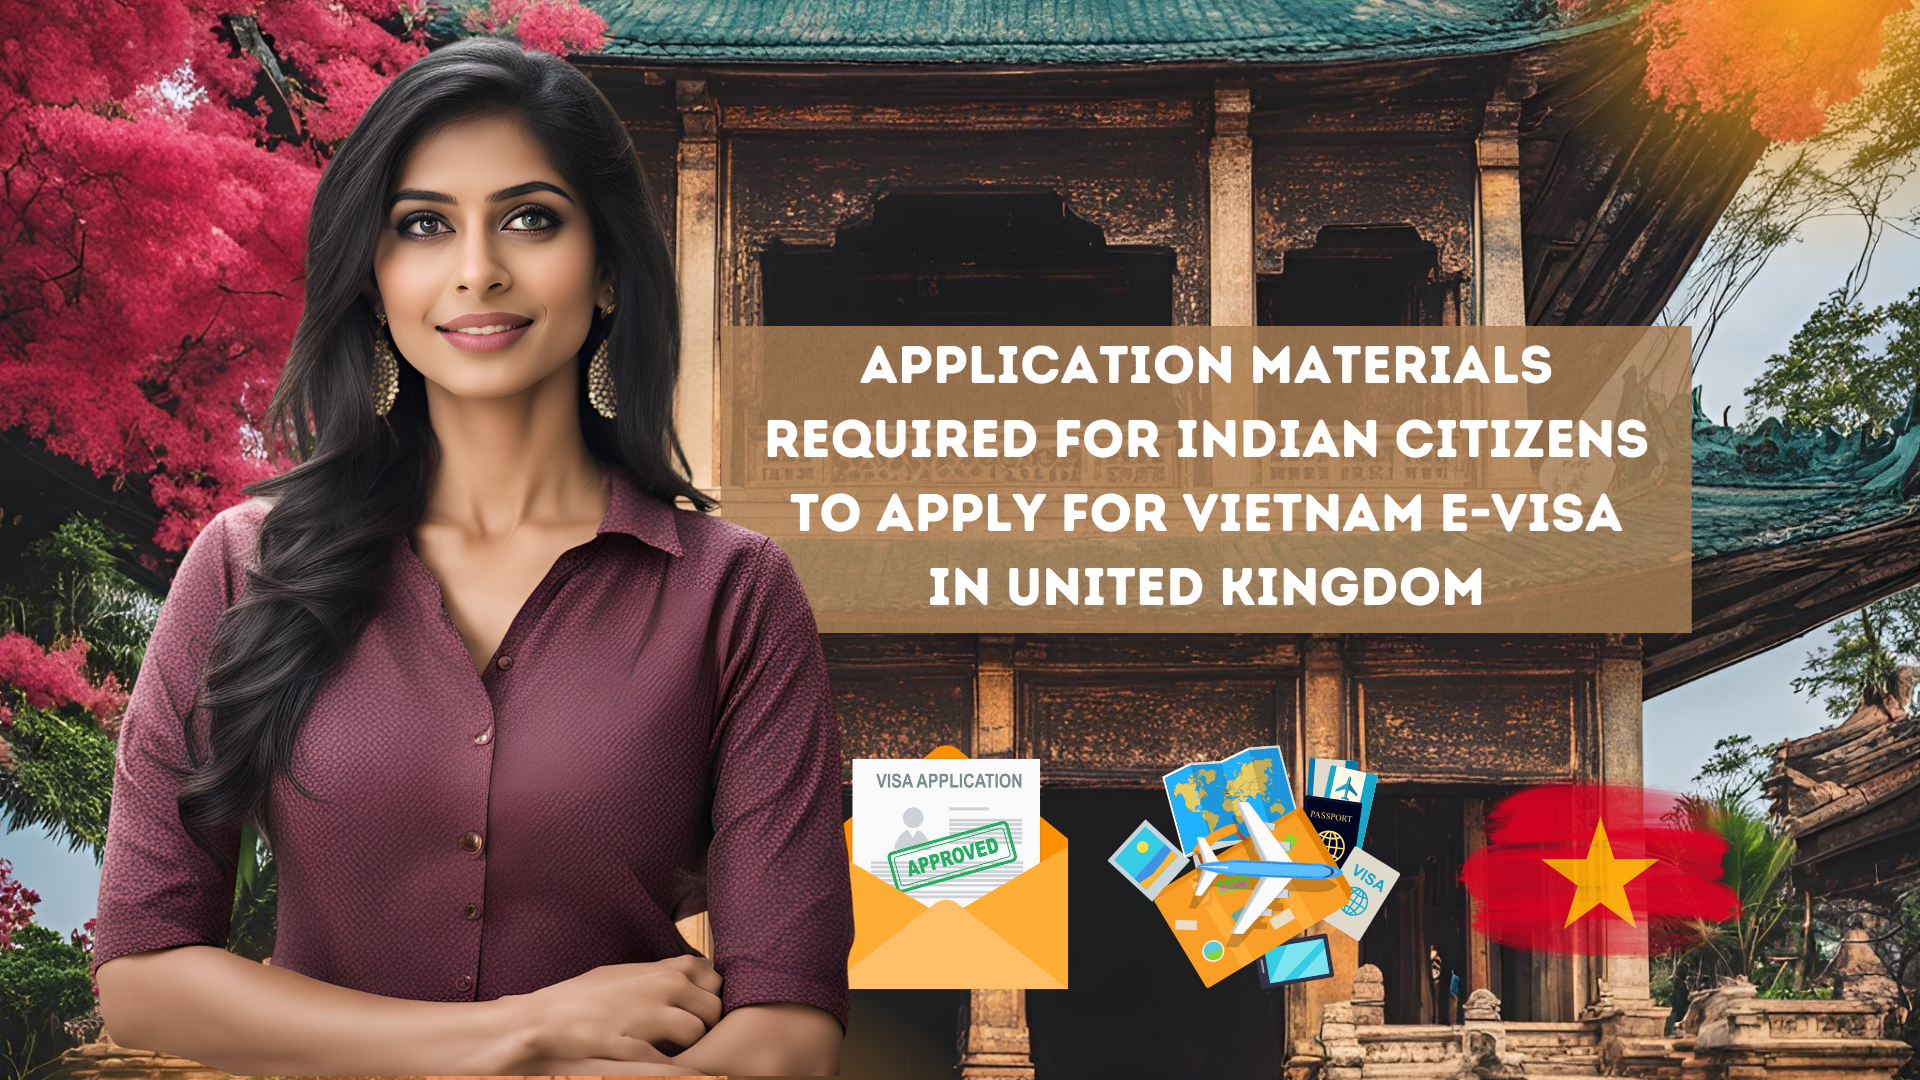 Application materials required for Indian citizens to apply for Vietnam e-visa in United Kingdom